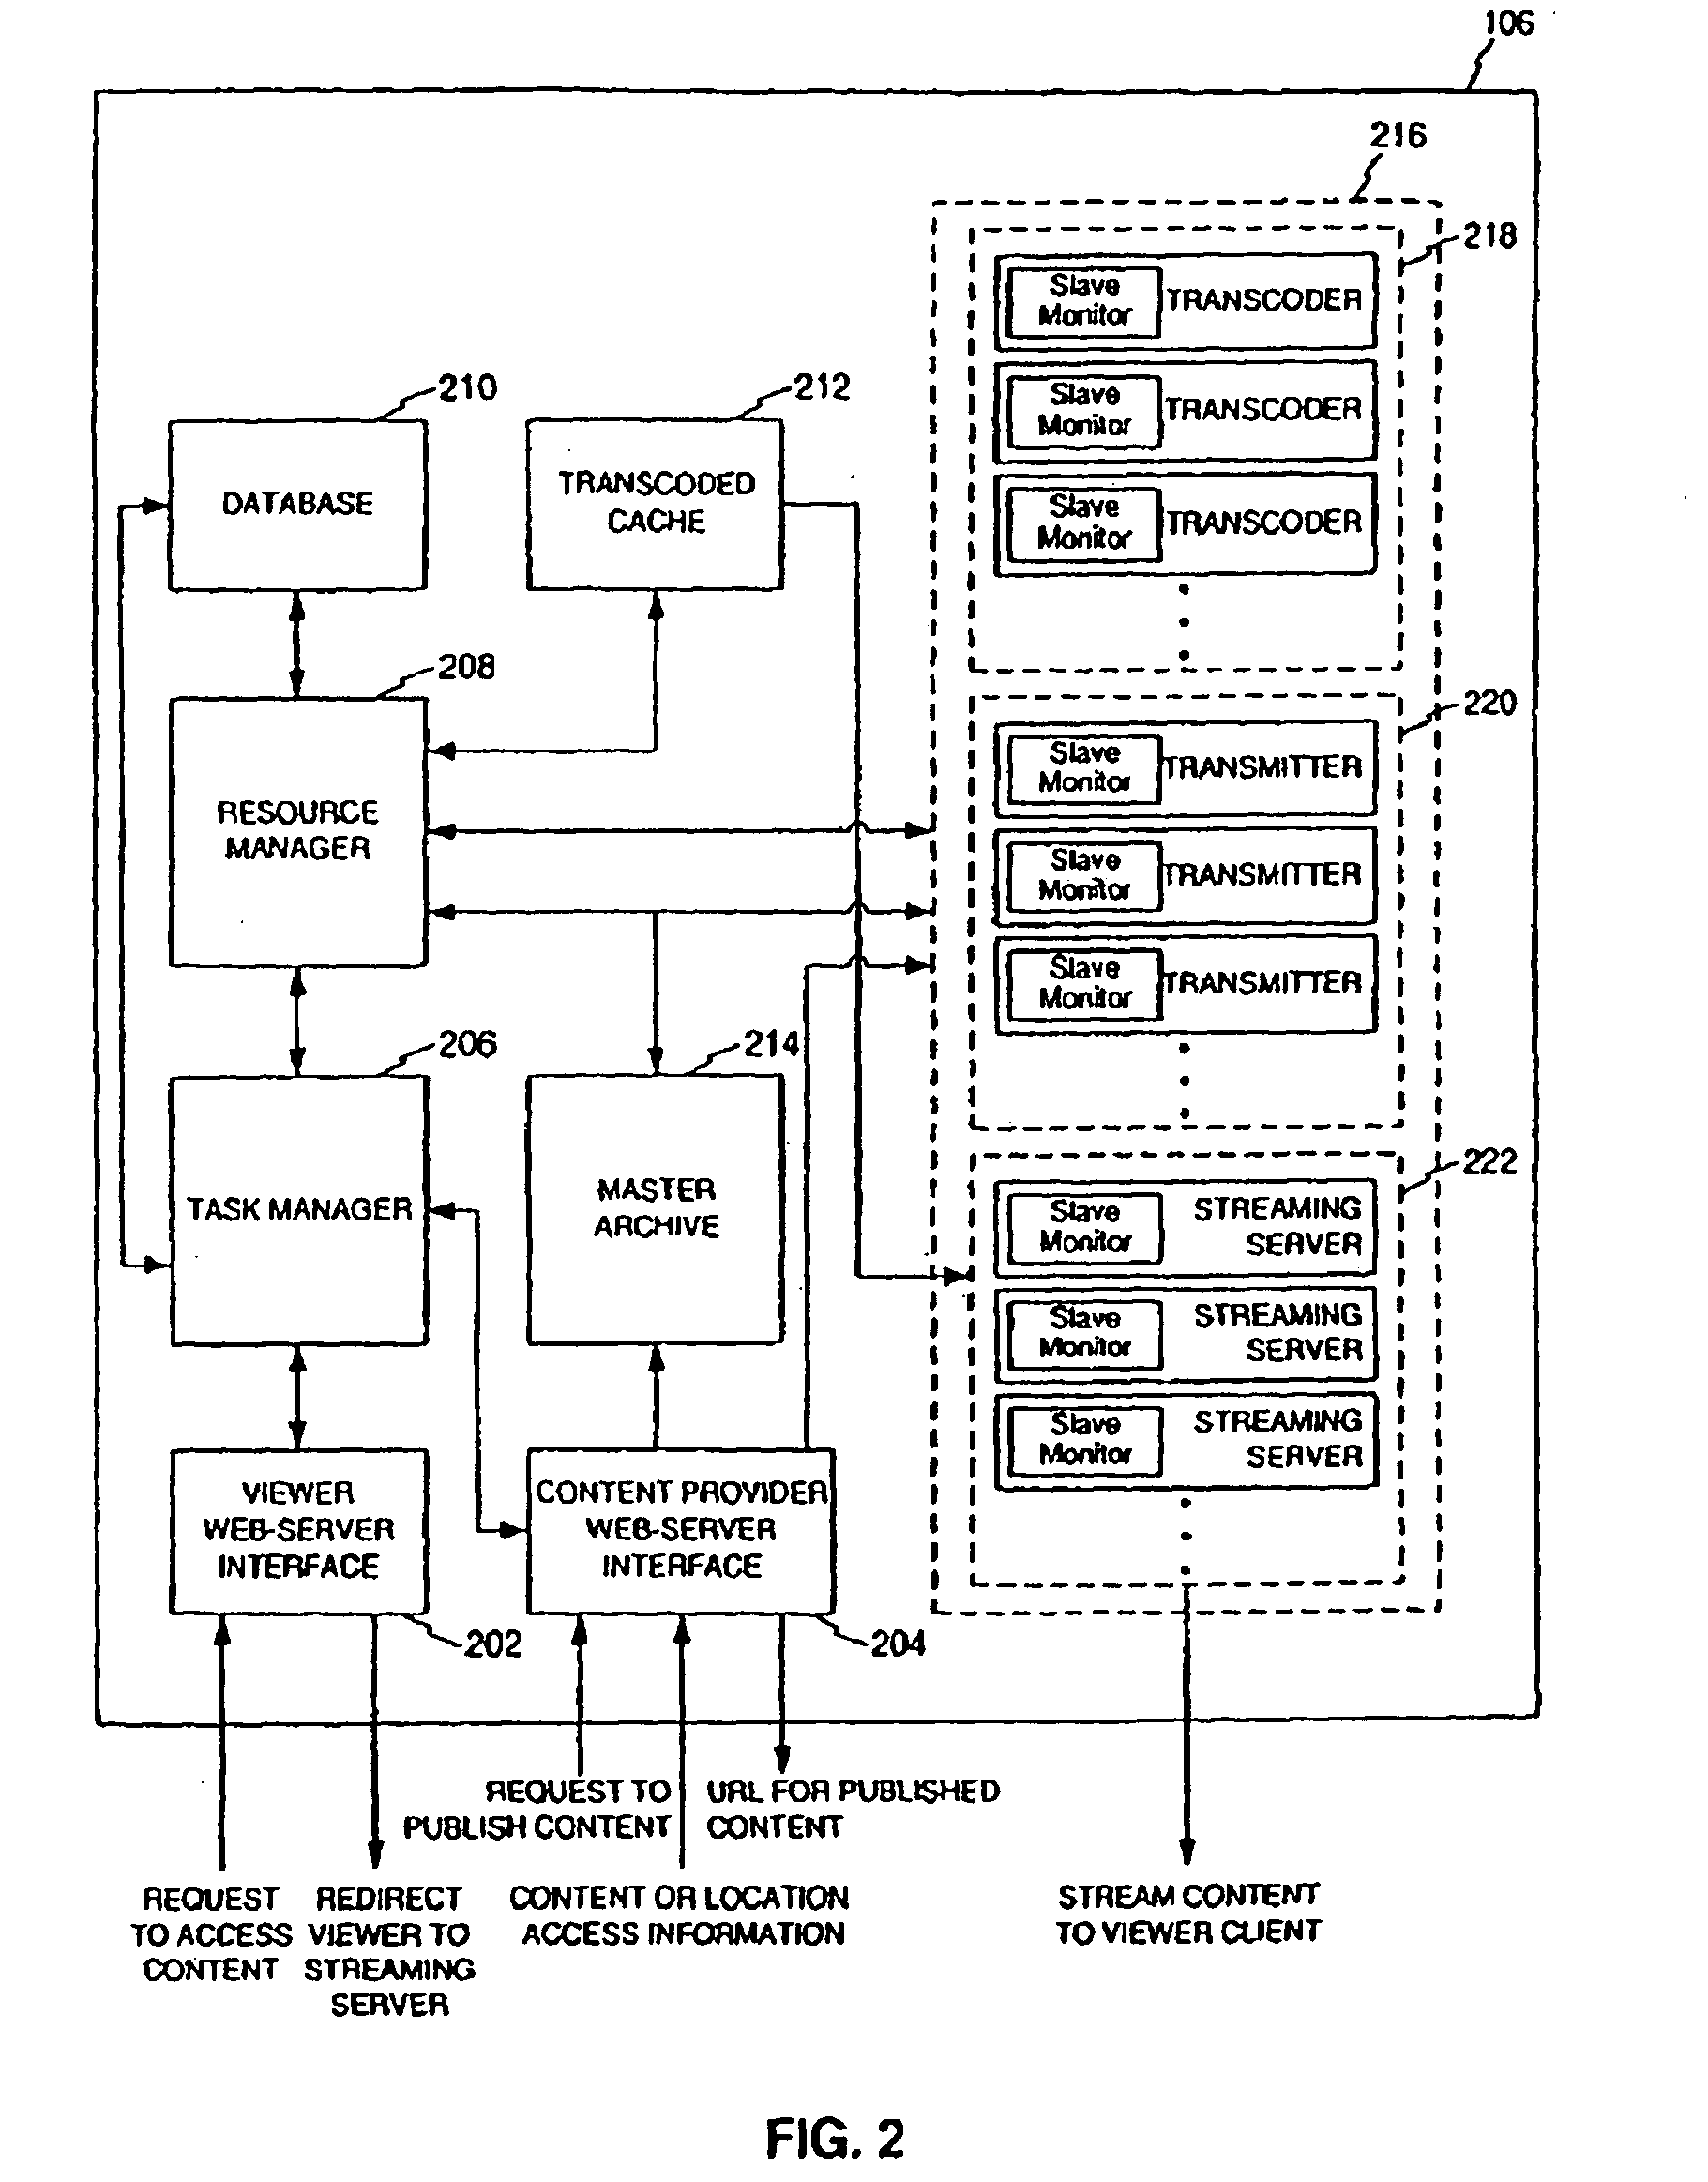 Distributed on-demand media transcoding system and method